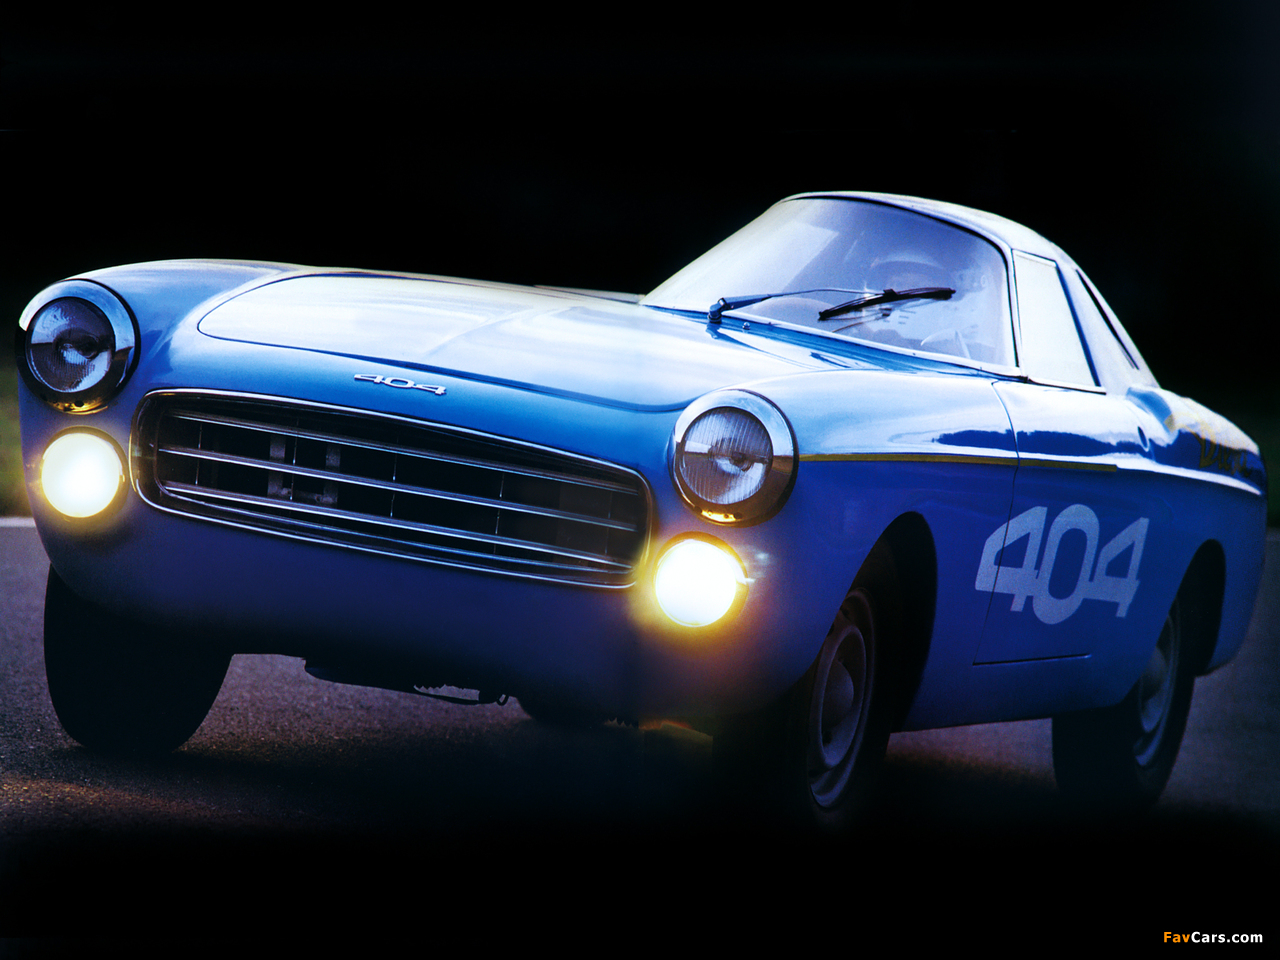 Peugeot 404 Diesel Record Car 1965 pictures (1280 x 960)